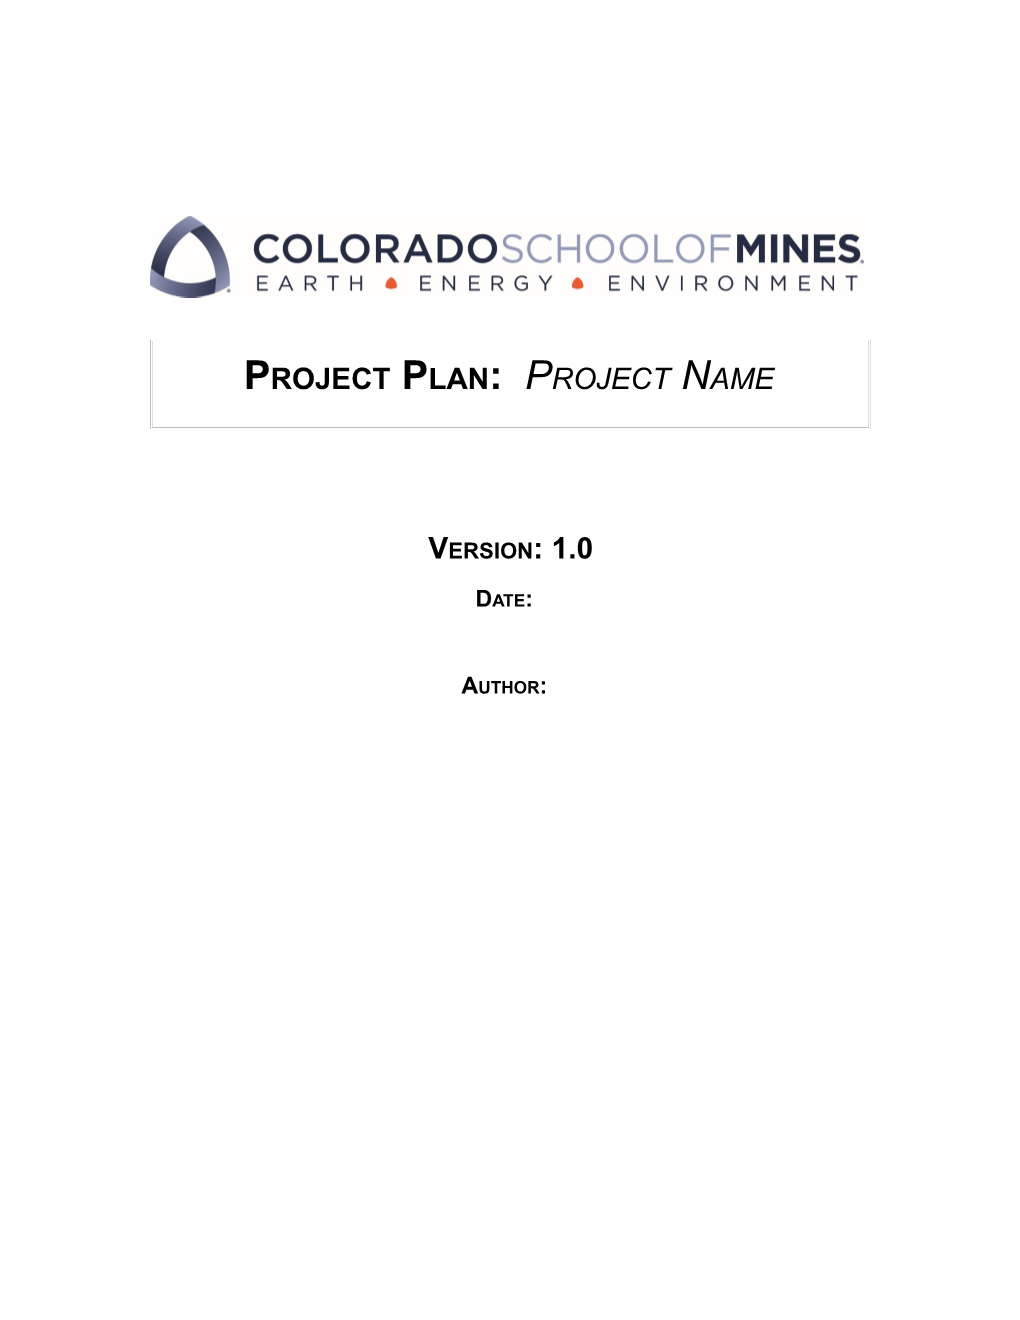 Project Plan: Project Name